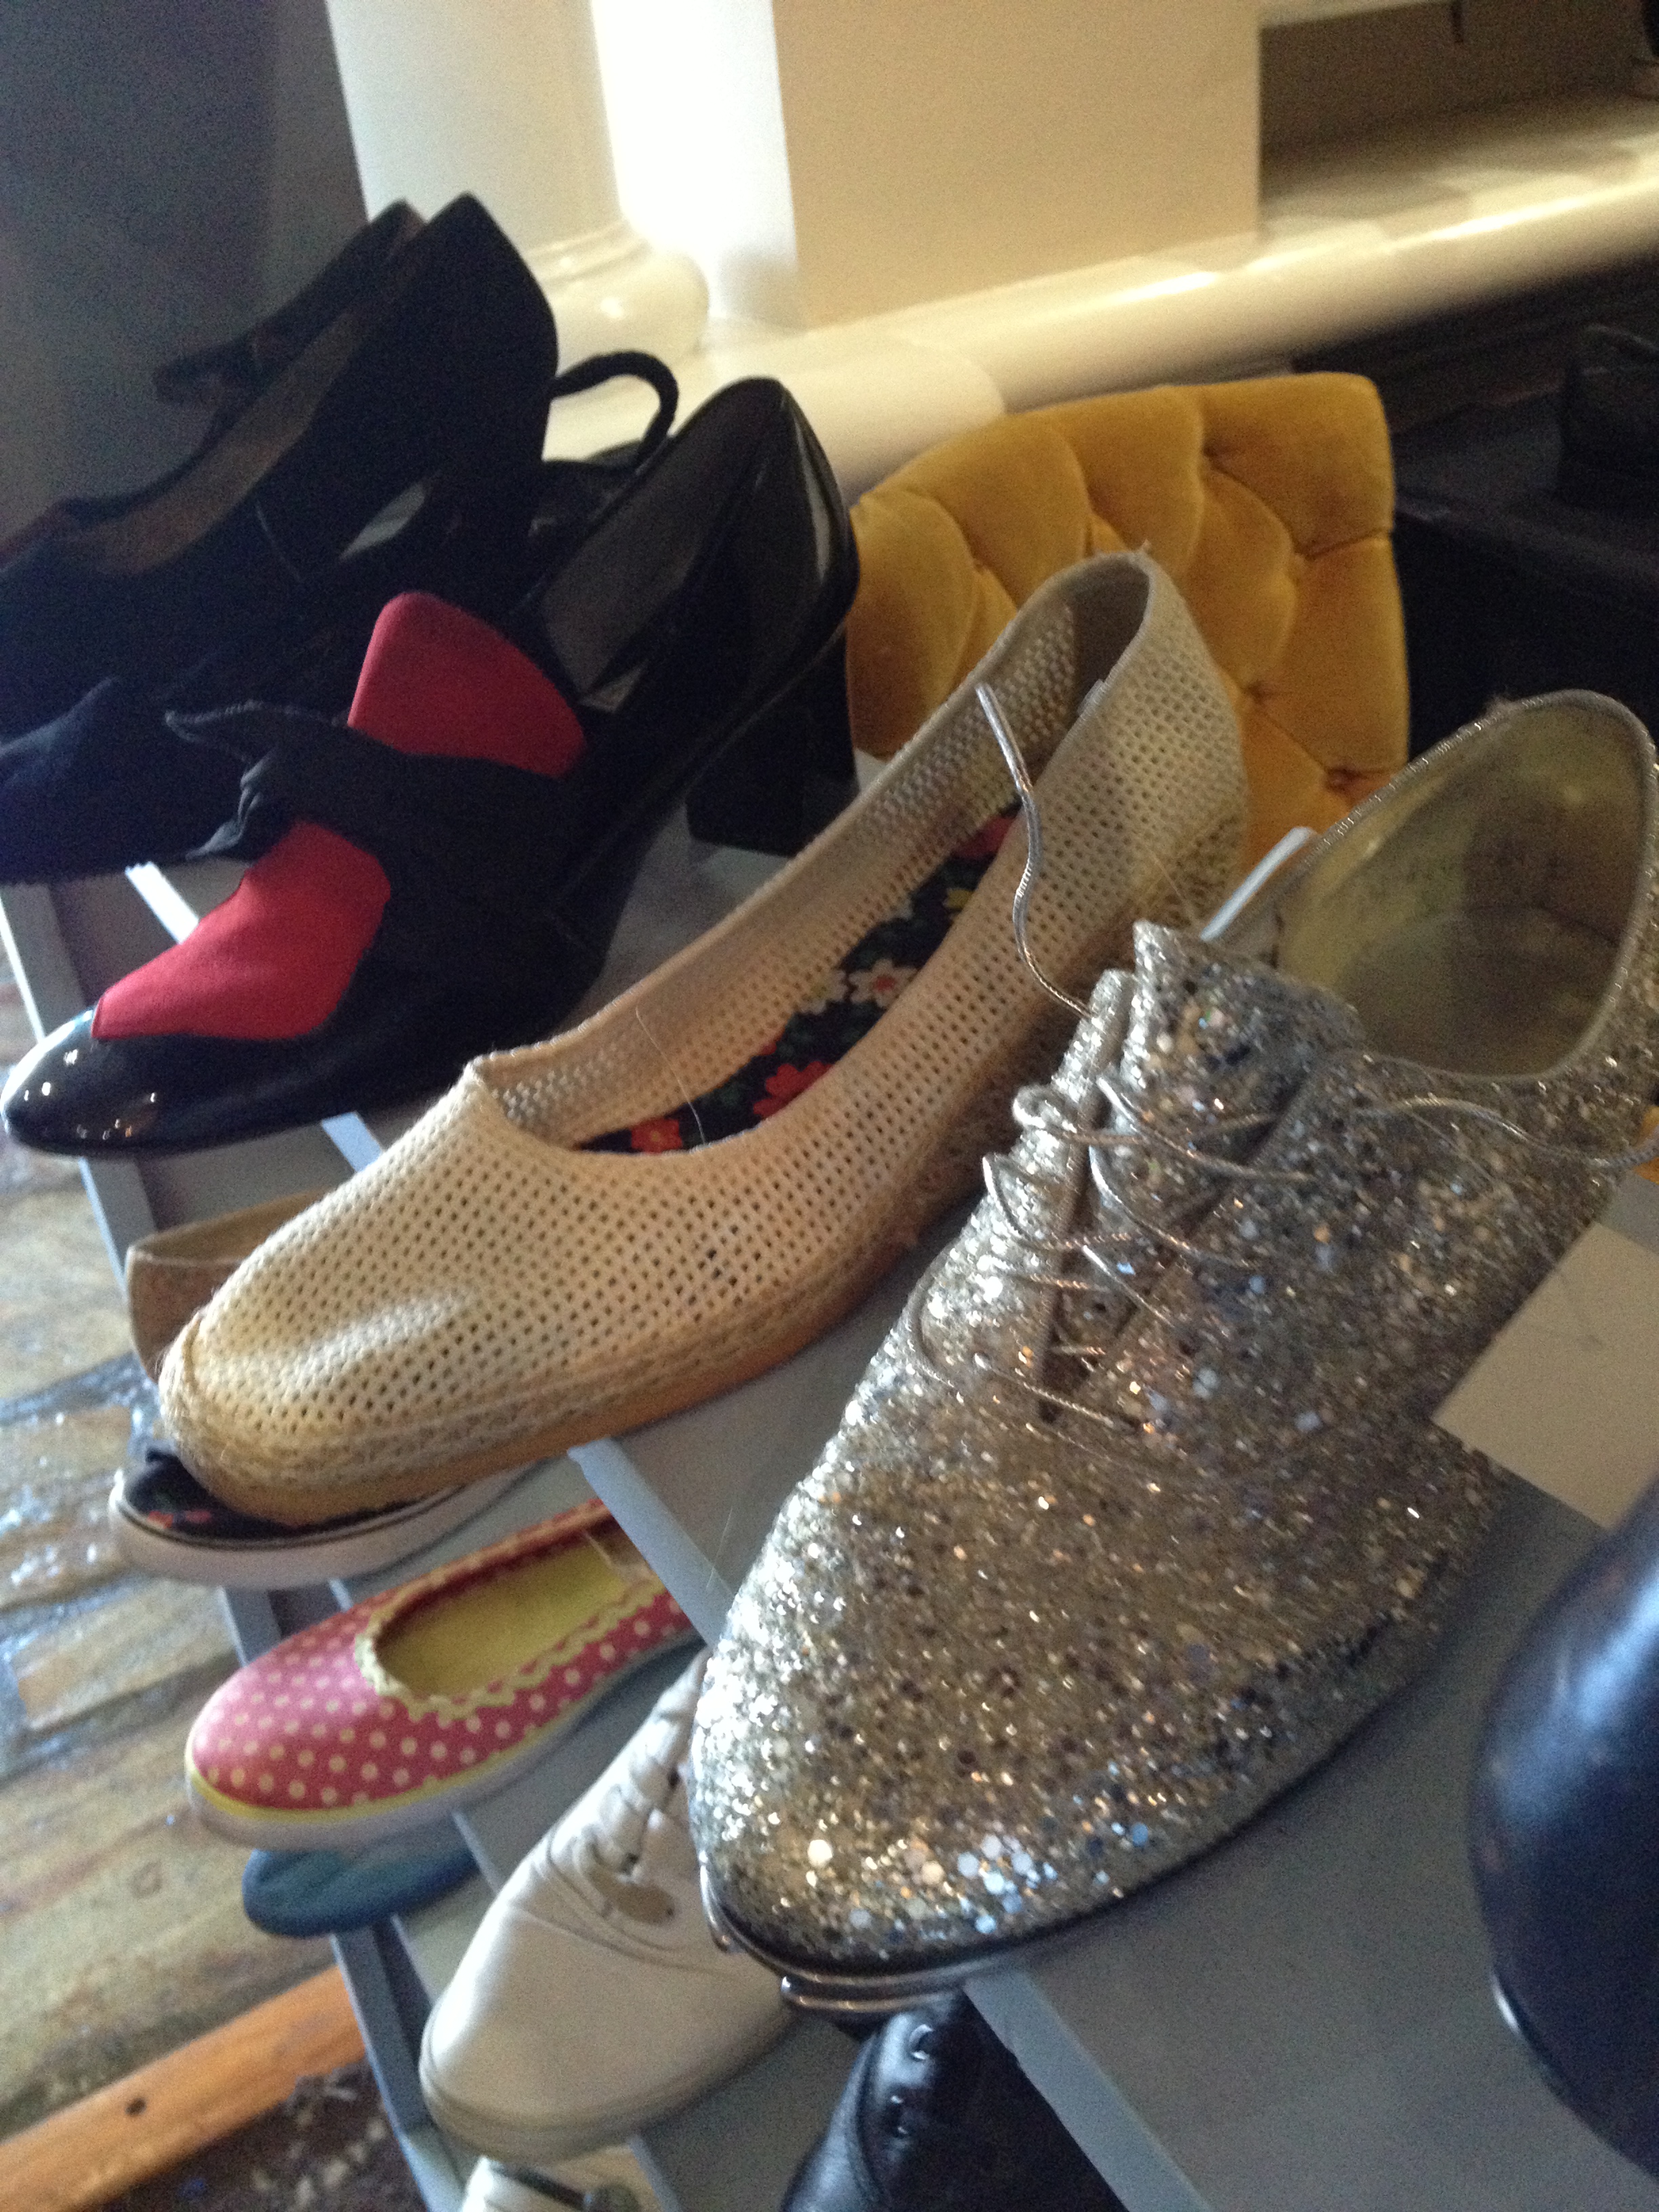 sparkly tap shoes